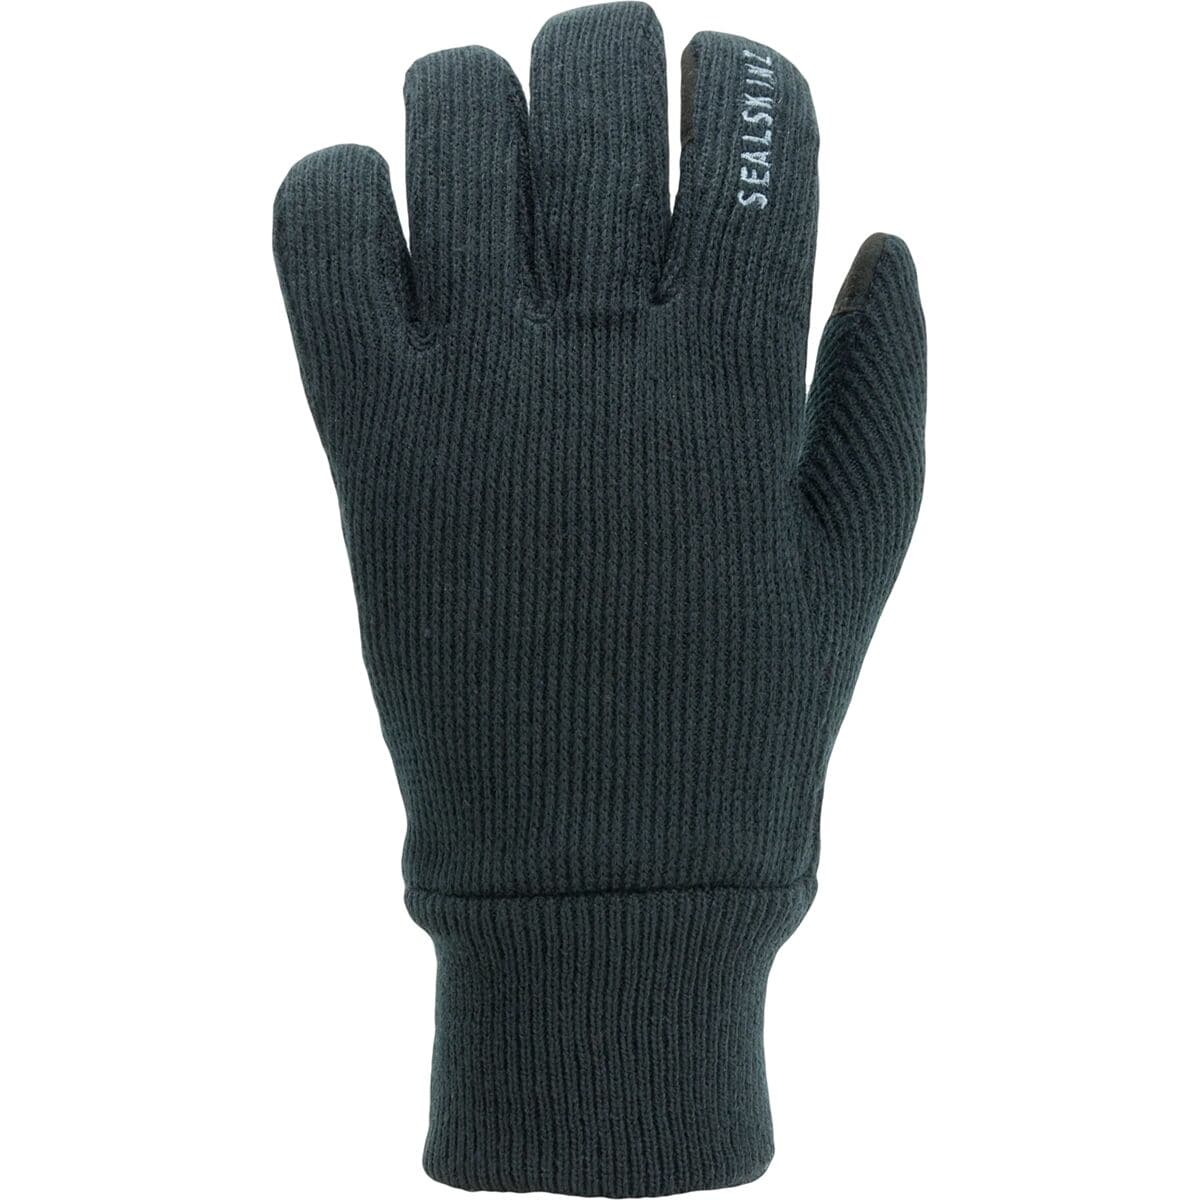 SealSkinz Windproof All Weather Knitted Glove Black